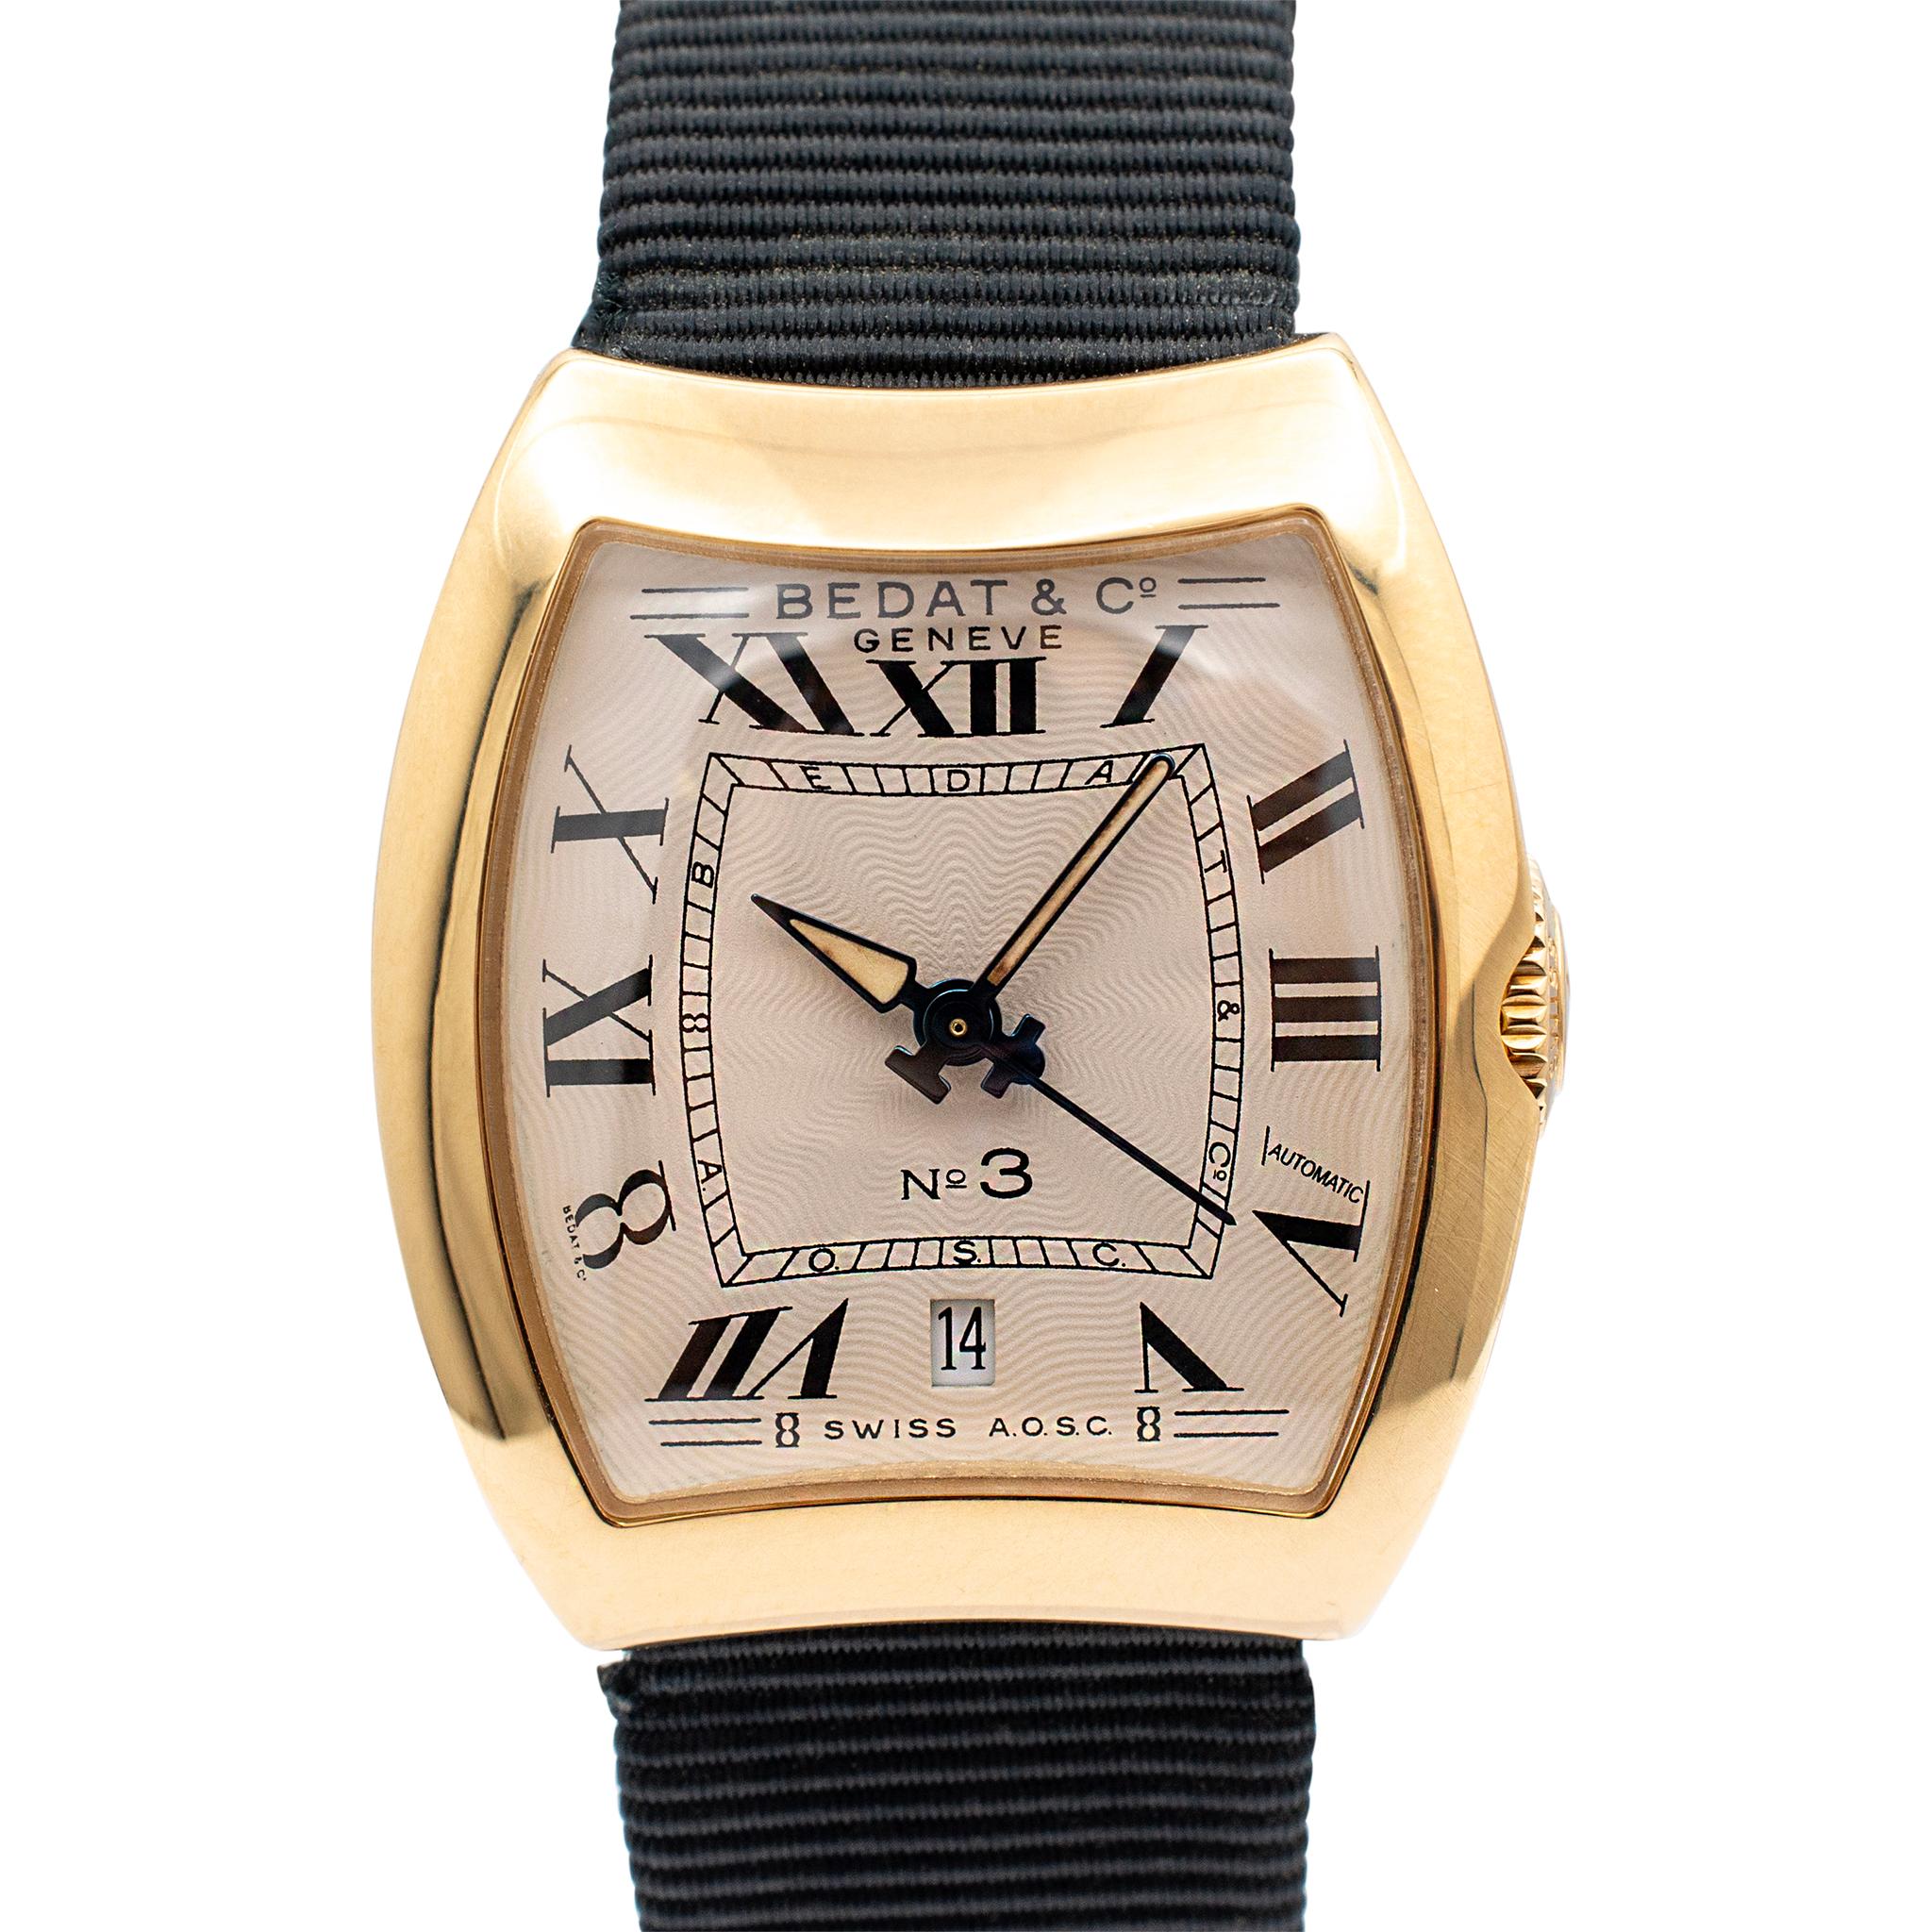 Brand: Bedat & Co.

Gender: Ladies

Metal Type: 18K Yellow & White Gold

Weight: 48.36 grams

Ladies 18K White Gold & yellow gold Bedat & Co. Swiss made watch. The metal was tested and determined to be 18K white & yellow gold. Engraved with 